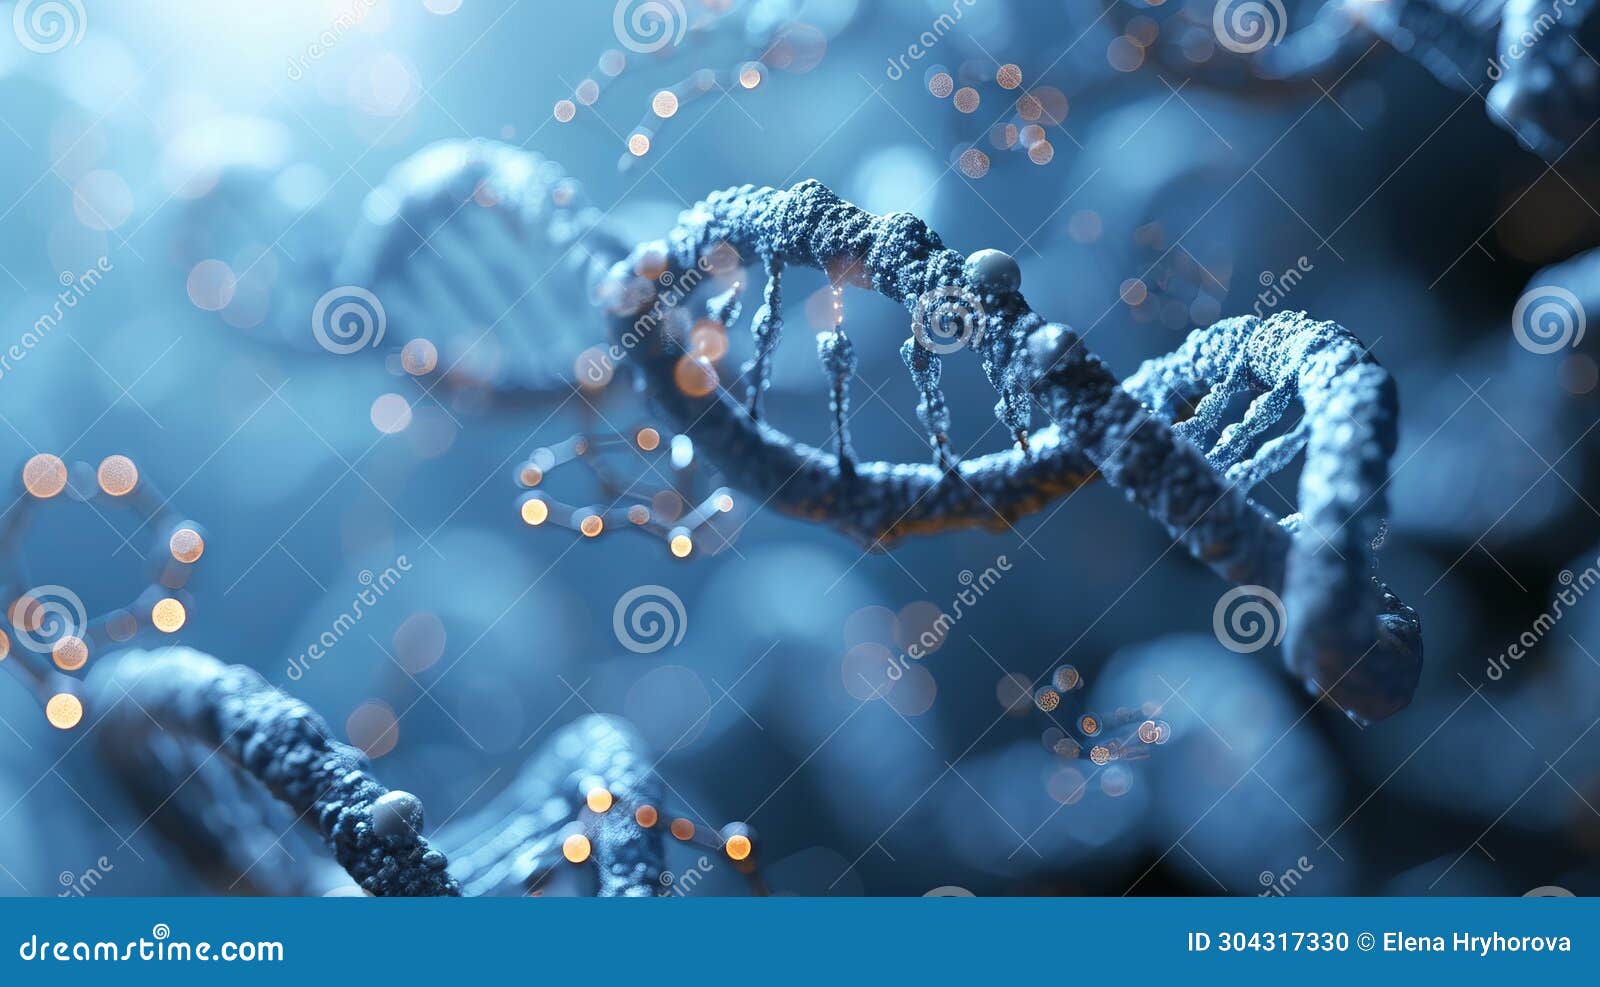 computer-generated image of twisting dna helices with bokeh